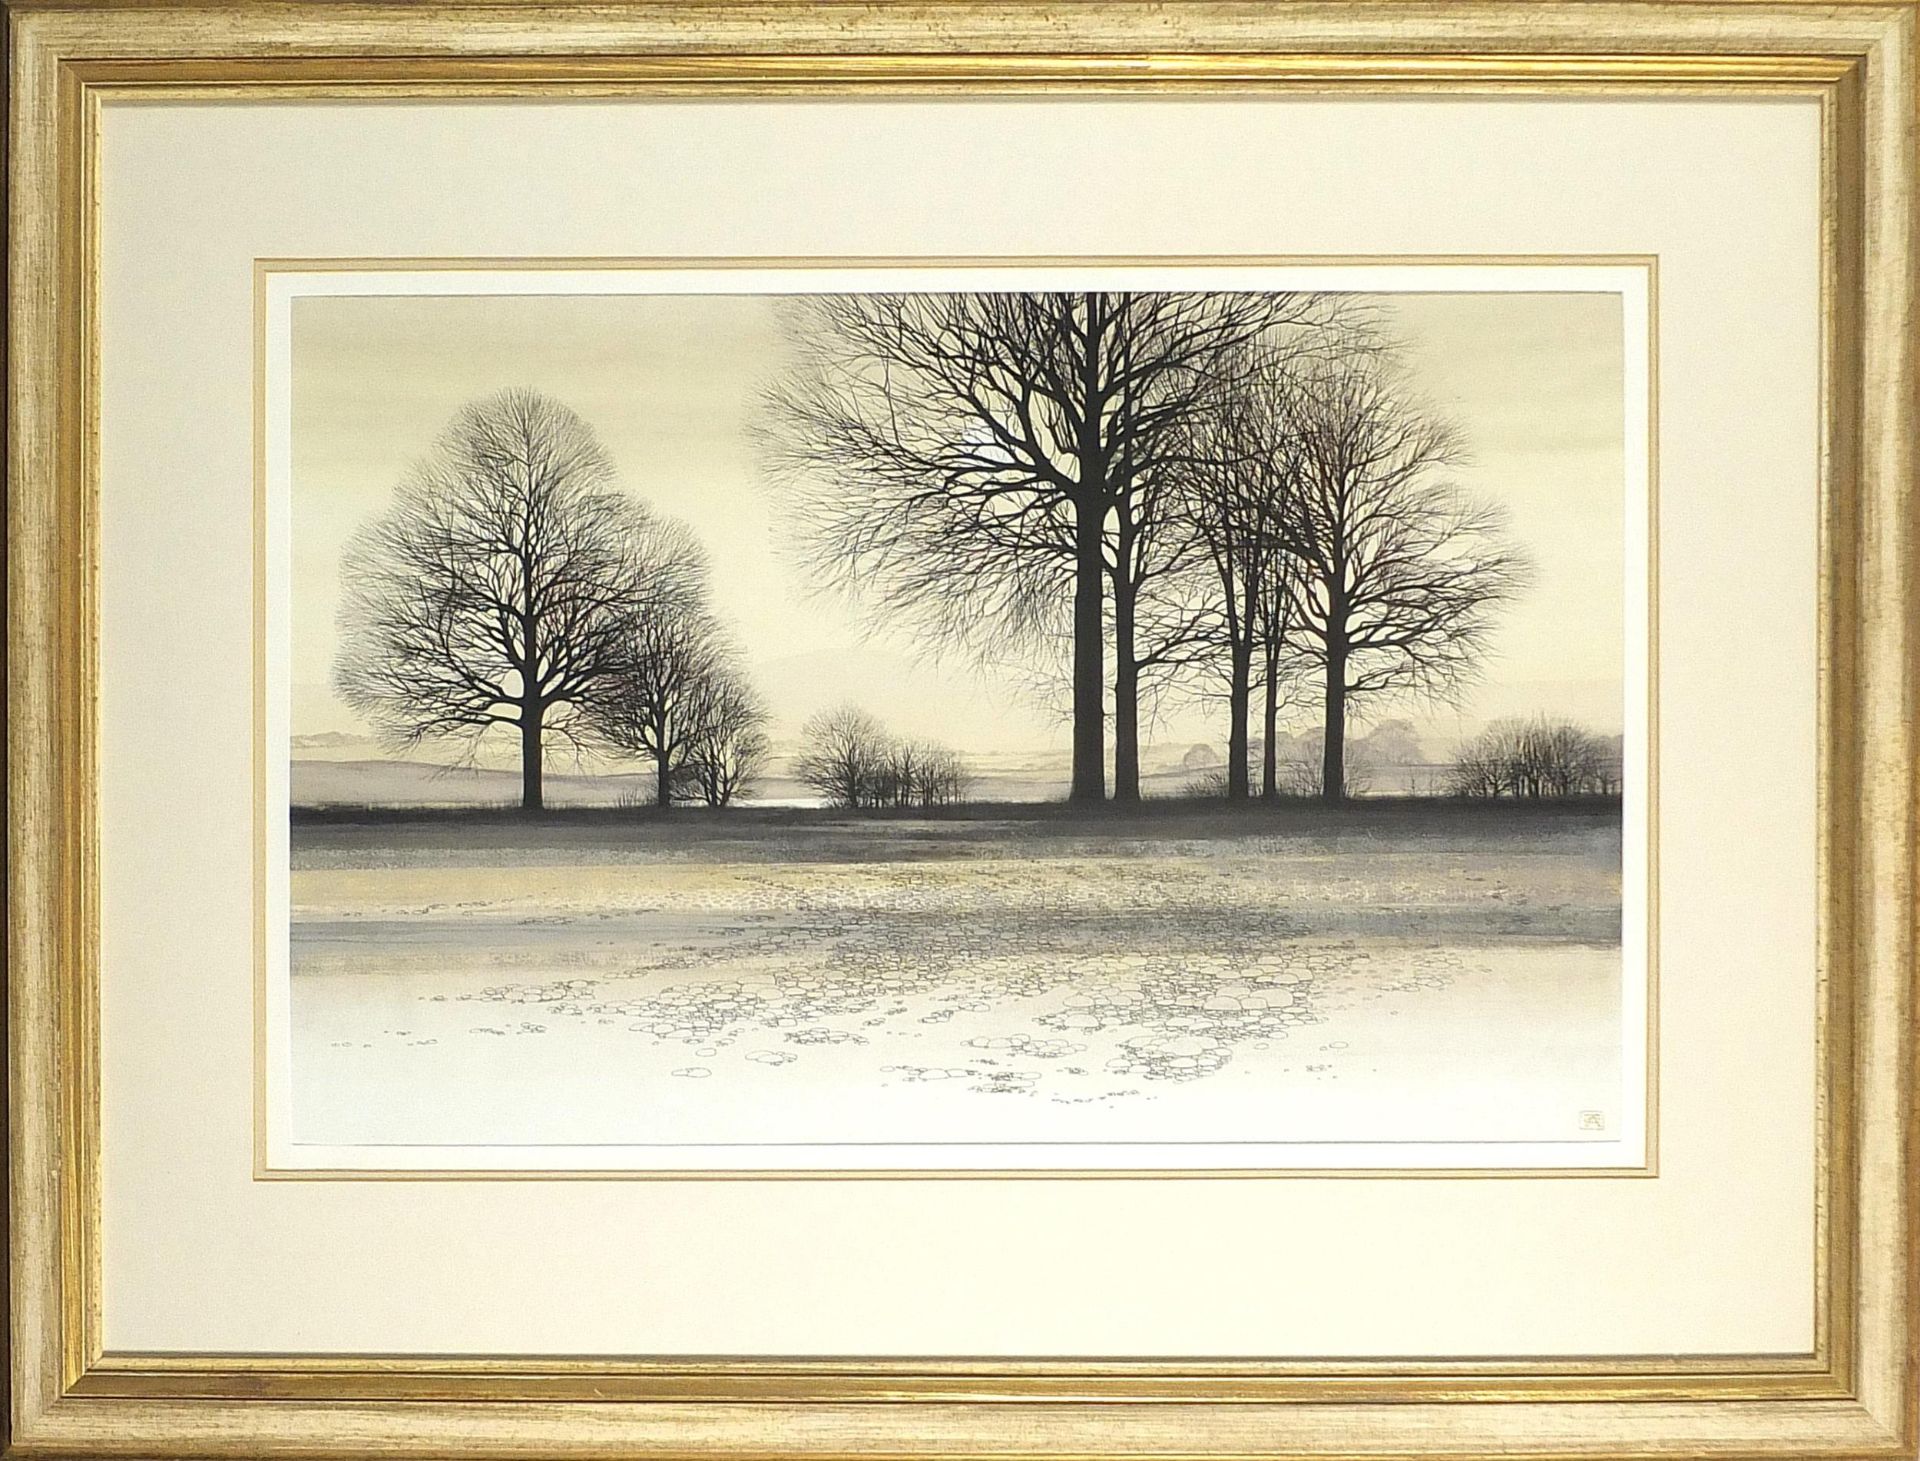 Kathleen Caddick - Lakeside trees, watercolour, details and The Florentine Galleries, Brighton label - Image 2 of 6